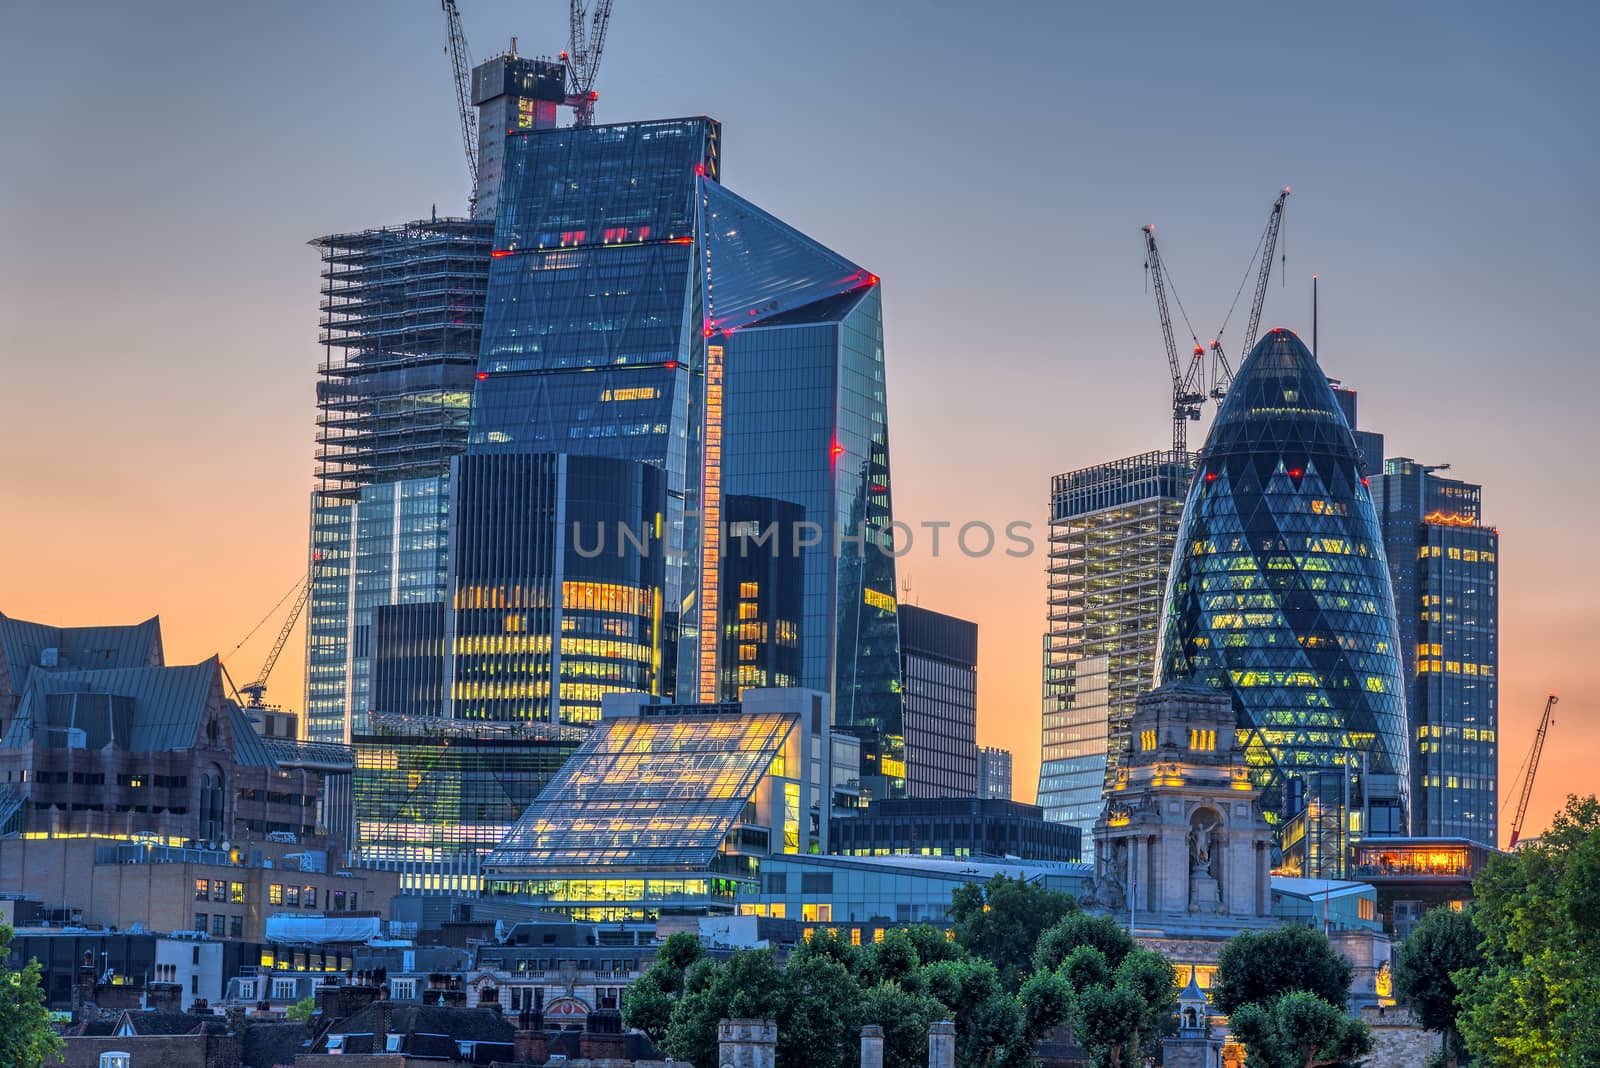 The skyscrapers of the City of London after sunset